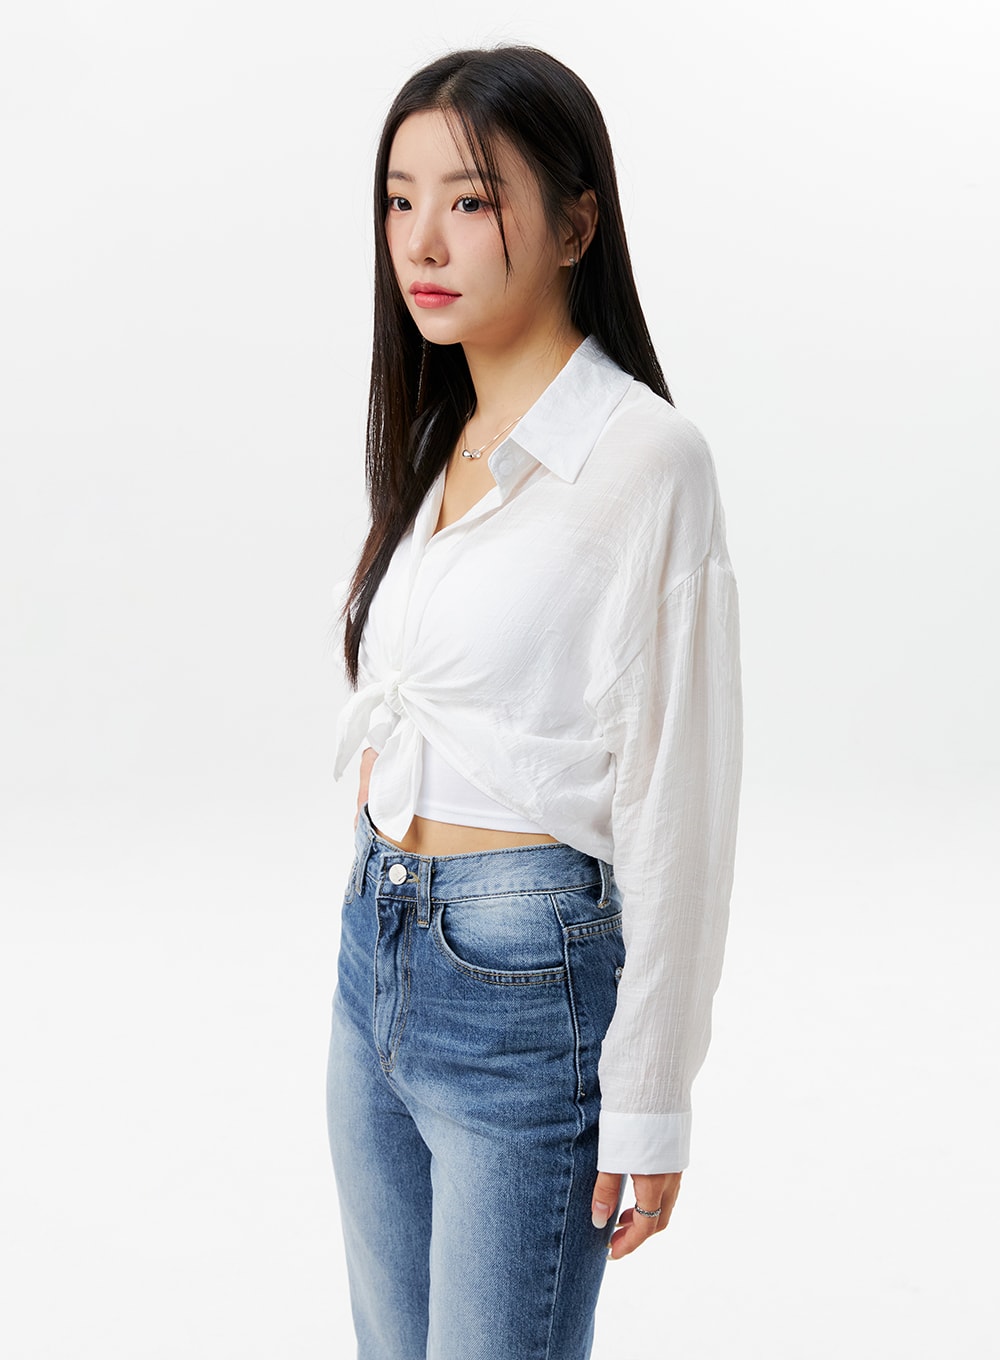 Woman's Cropped Mesh Jersey